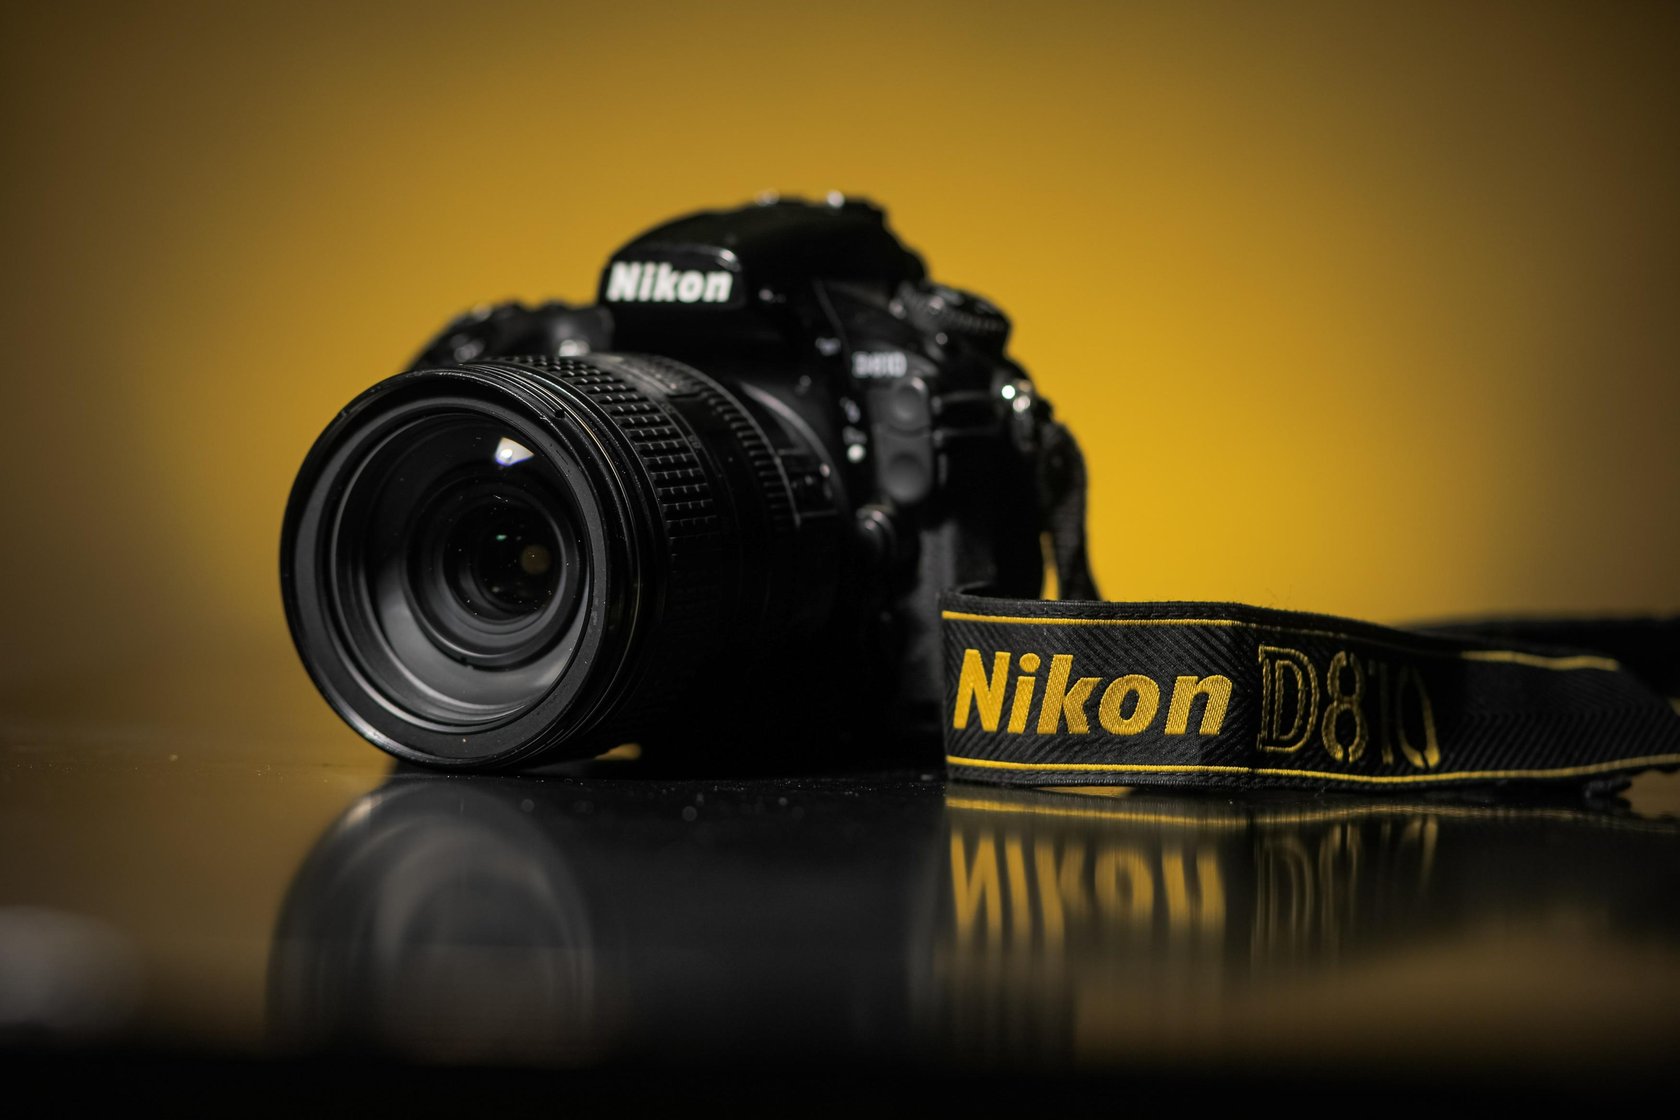 Nikon Z50 - Does It 4K Video, Vlog & Photo - Well?, I Vlogged & Snapped To  Find Out